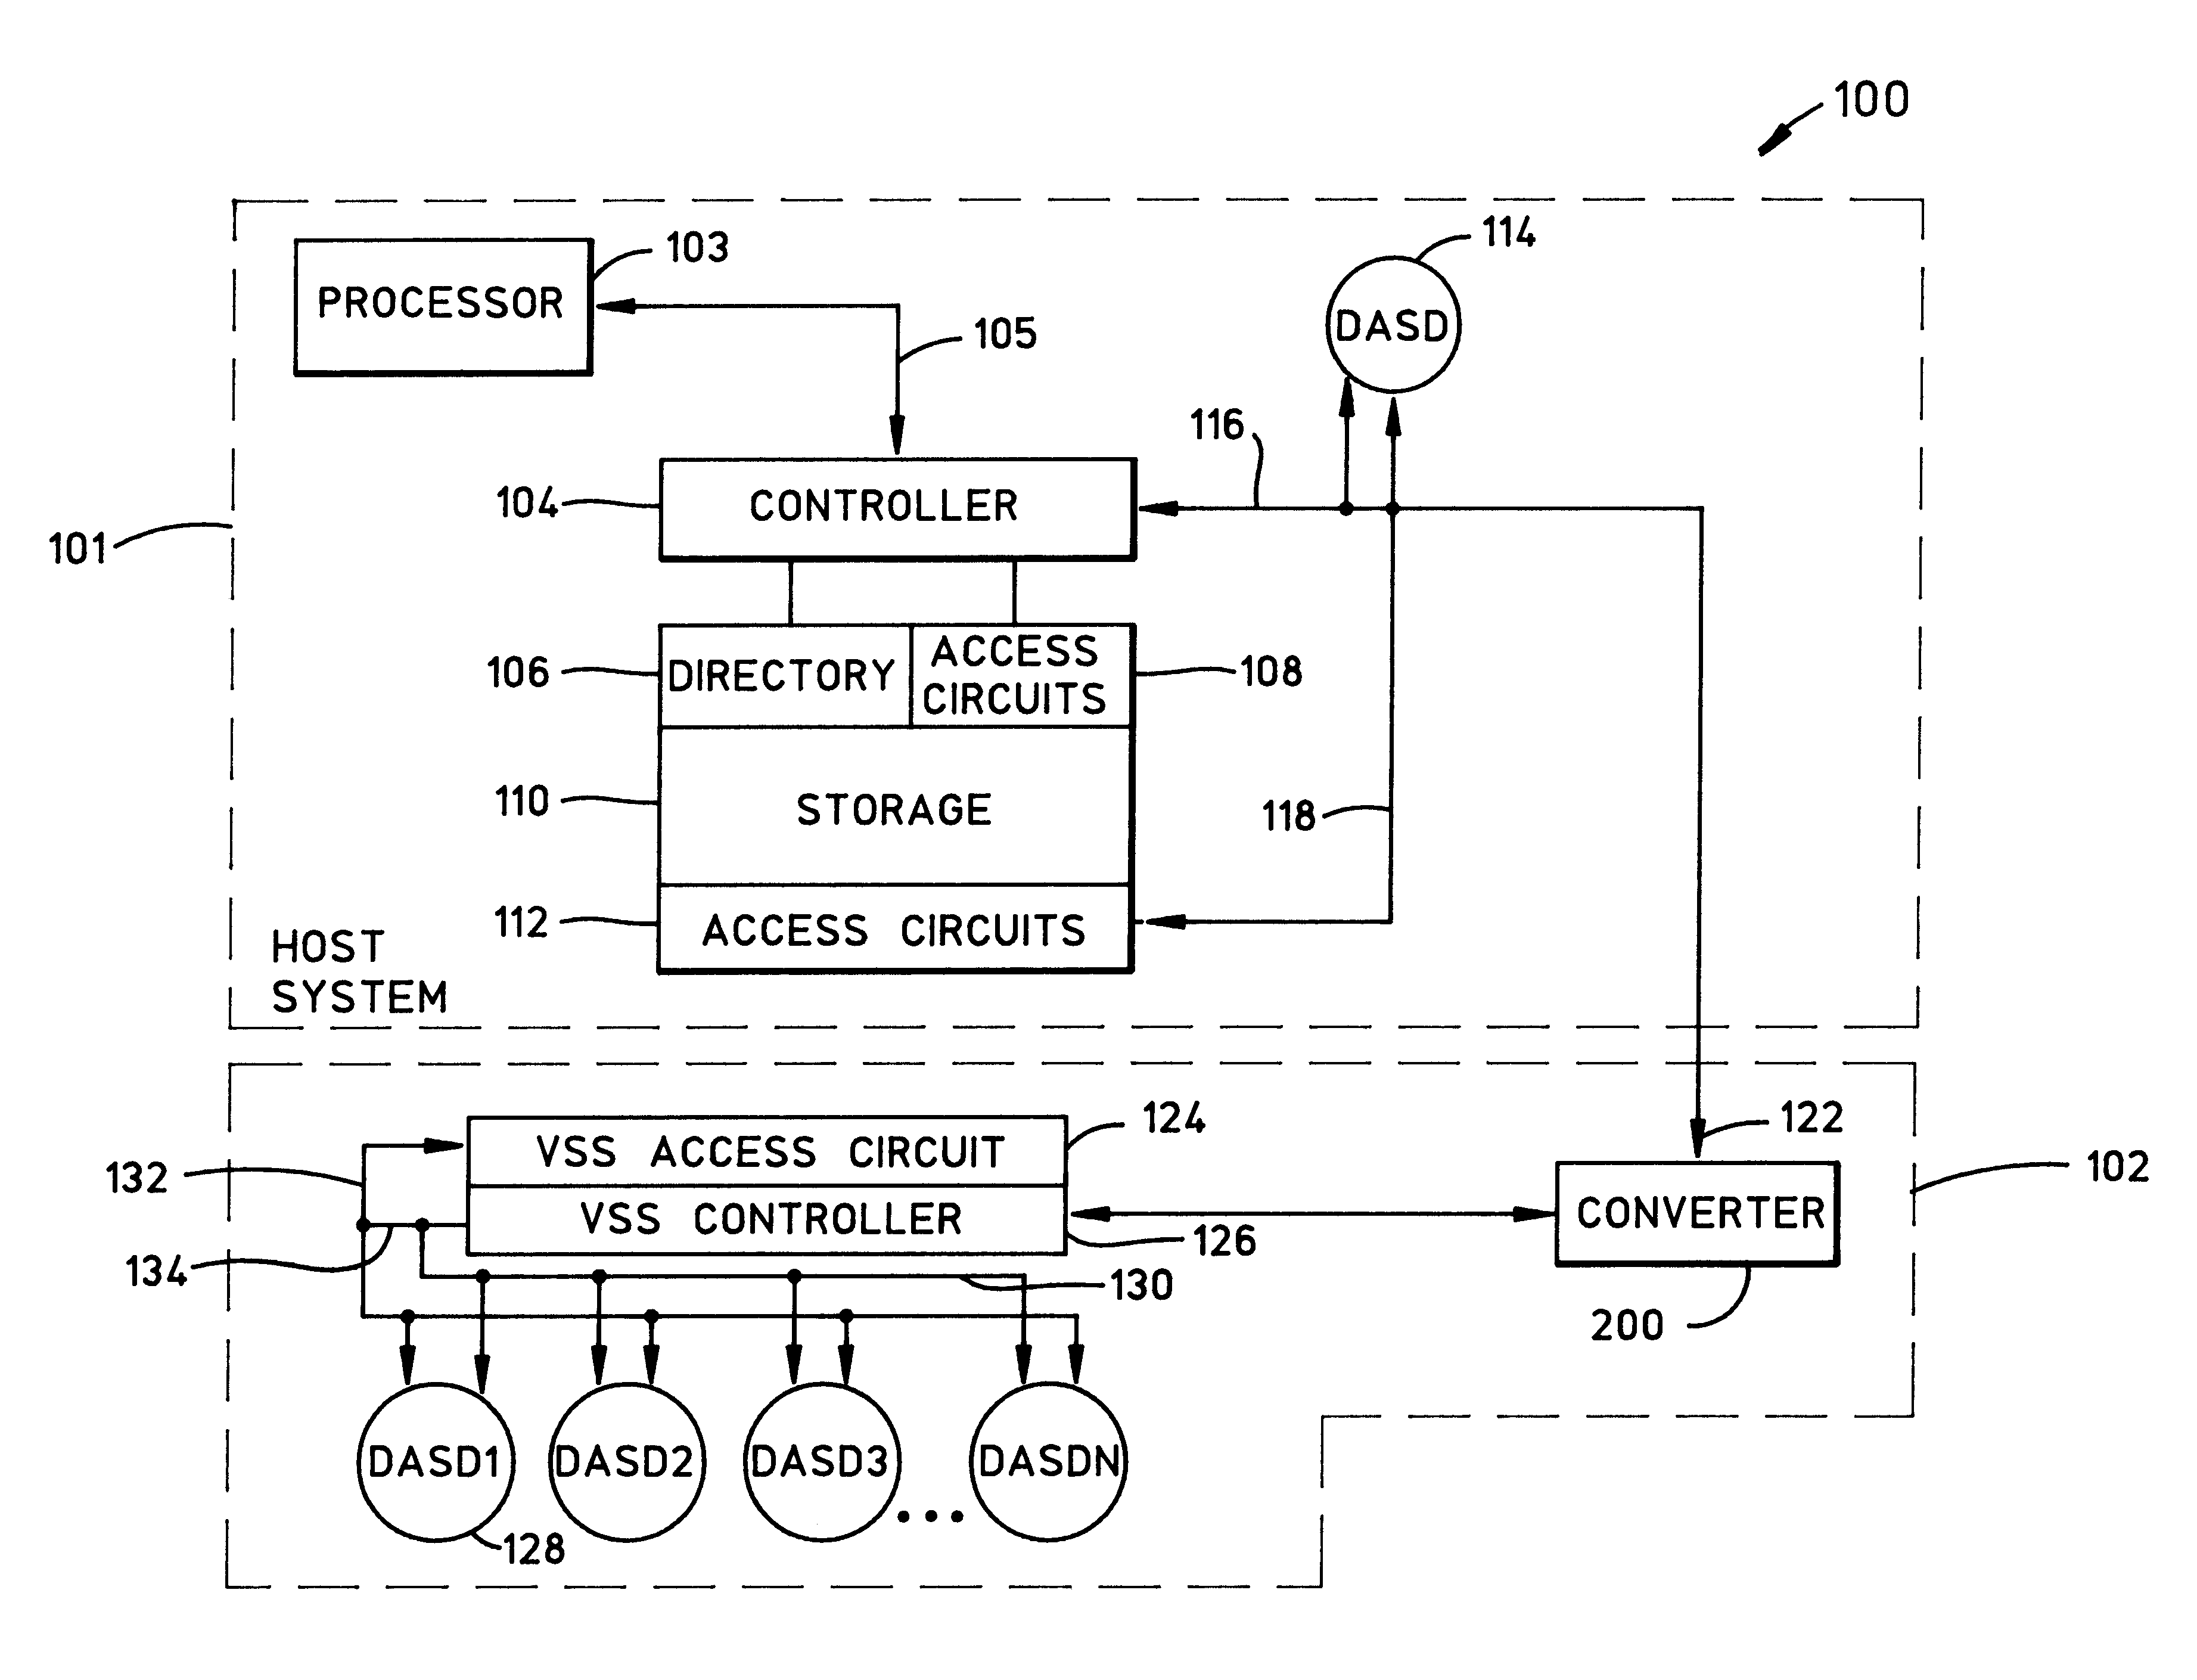 Apparatus and method for allowing existing ECKD MVS DASD using an ESCON interface to be used by an open storage using SCSI-type interface